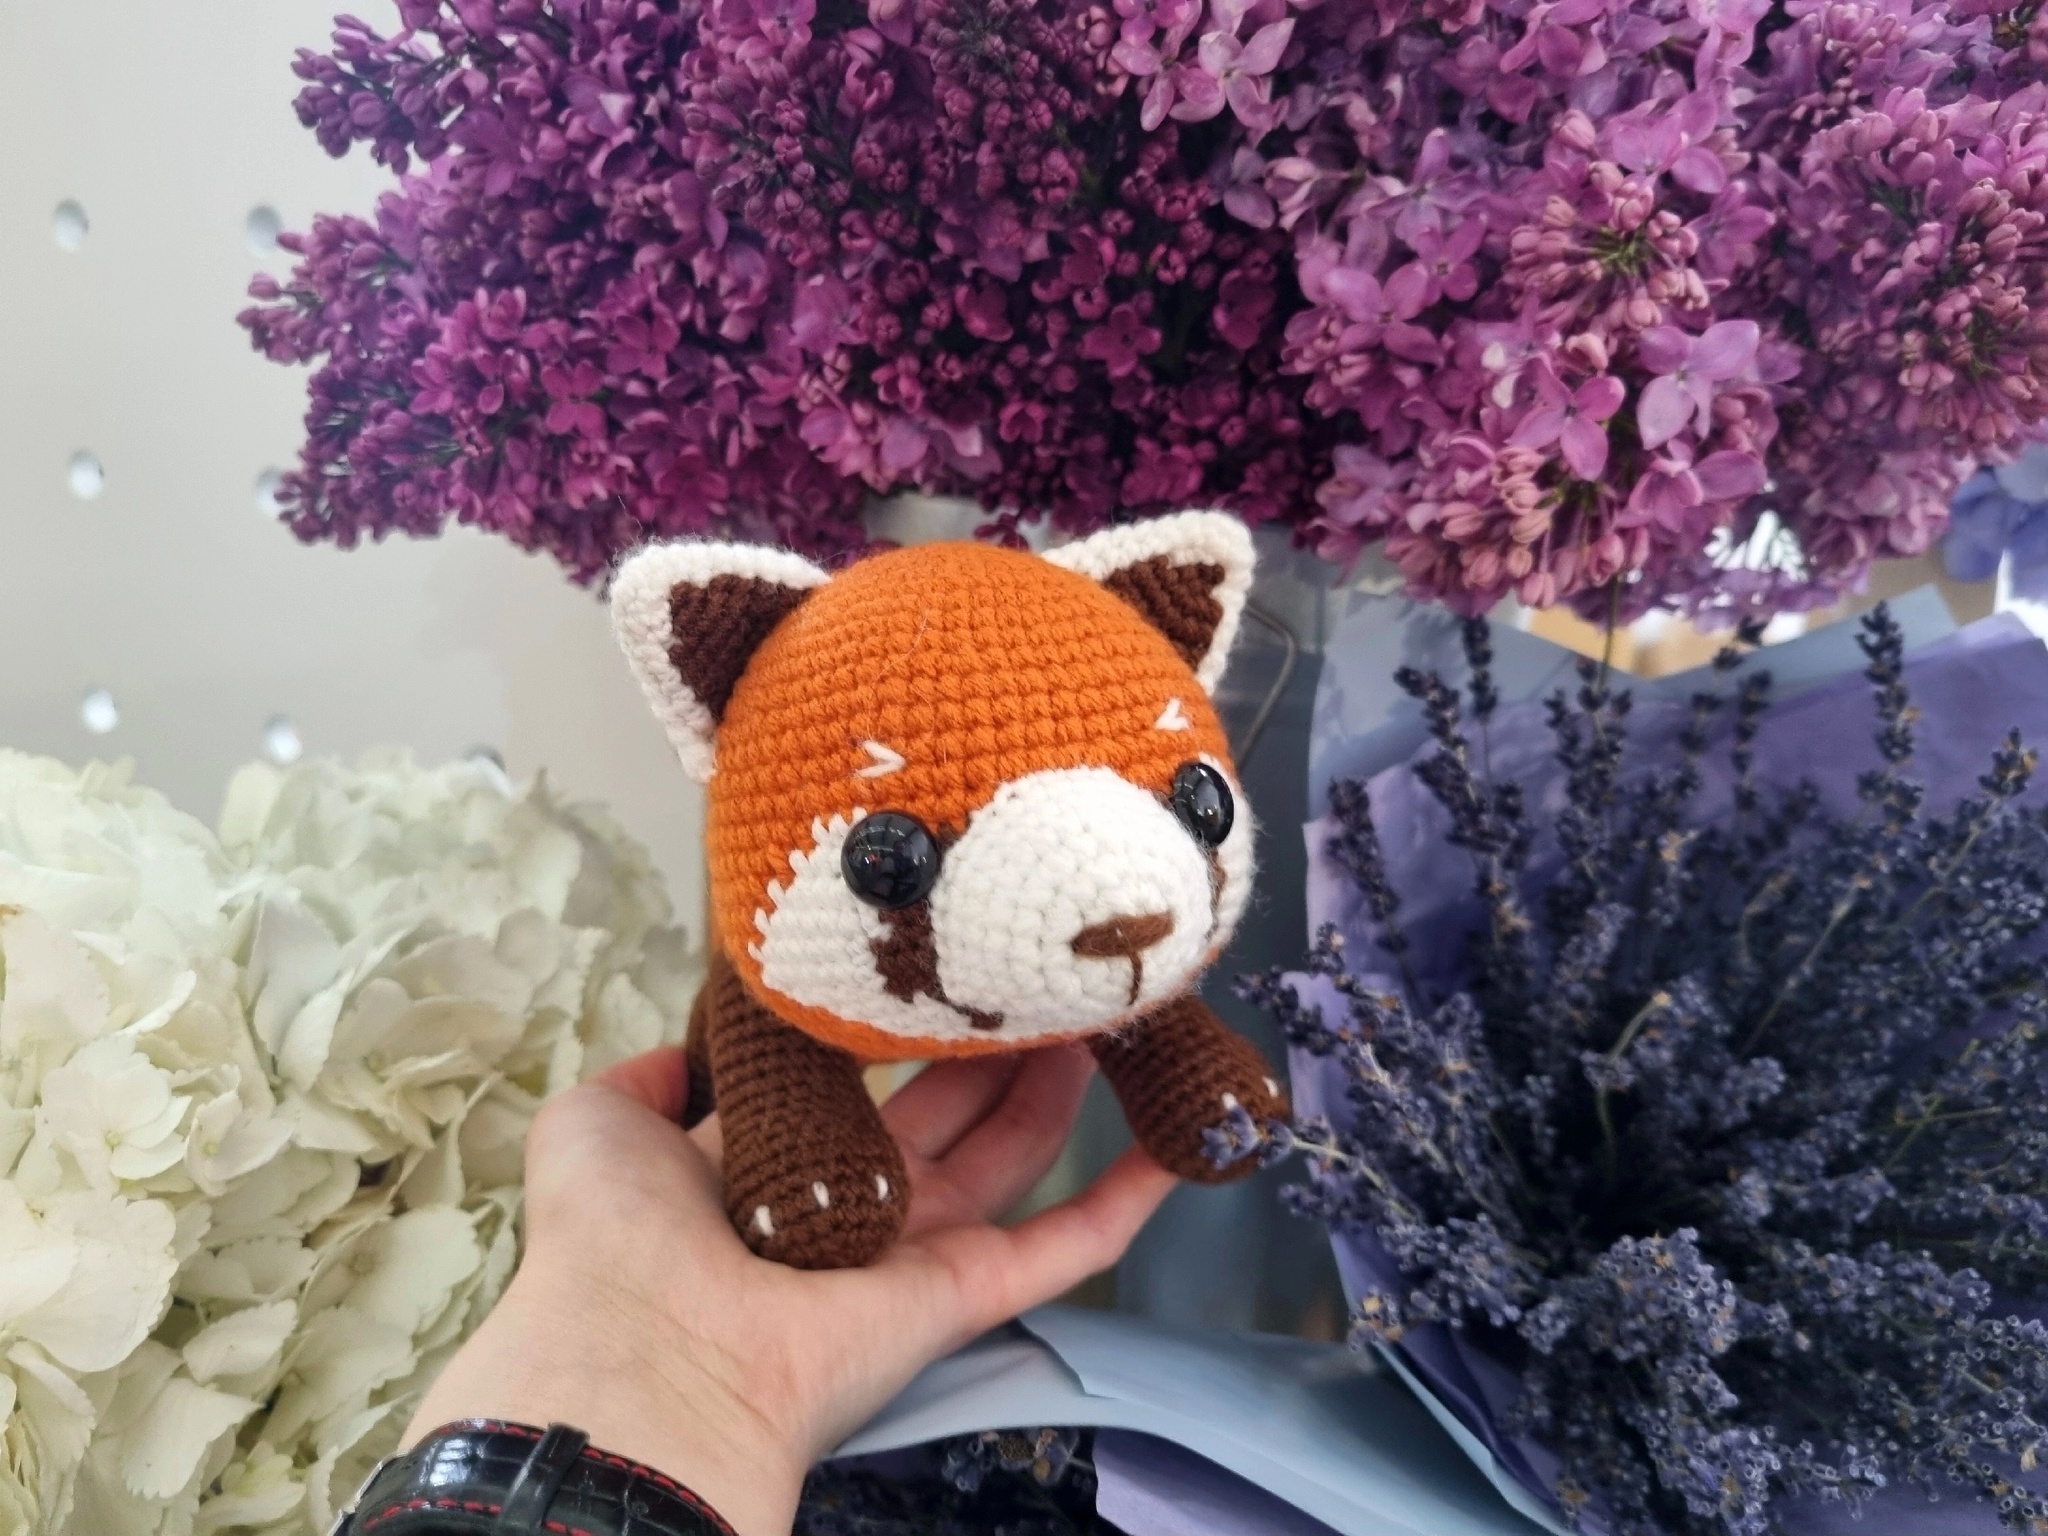 Red panda in Red color - My, Knitting, Knitted toys, Amigurumi, With your own hands, Hook, Needlework, Needlework without process, Author's toy, Toys, Soft toy, Panda, Red panda, Presents, Creation, Longpost